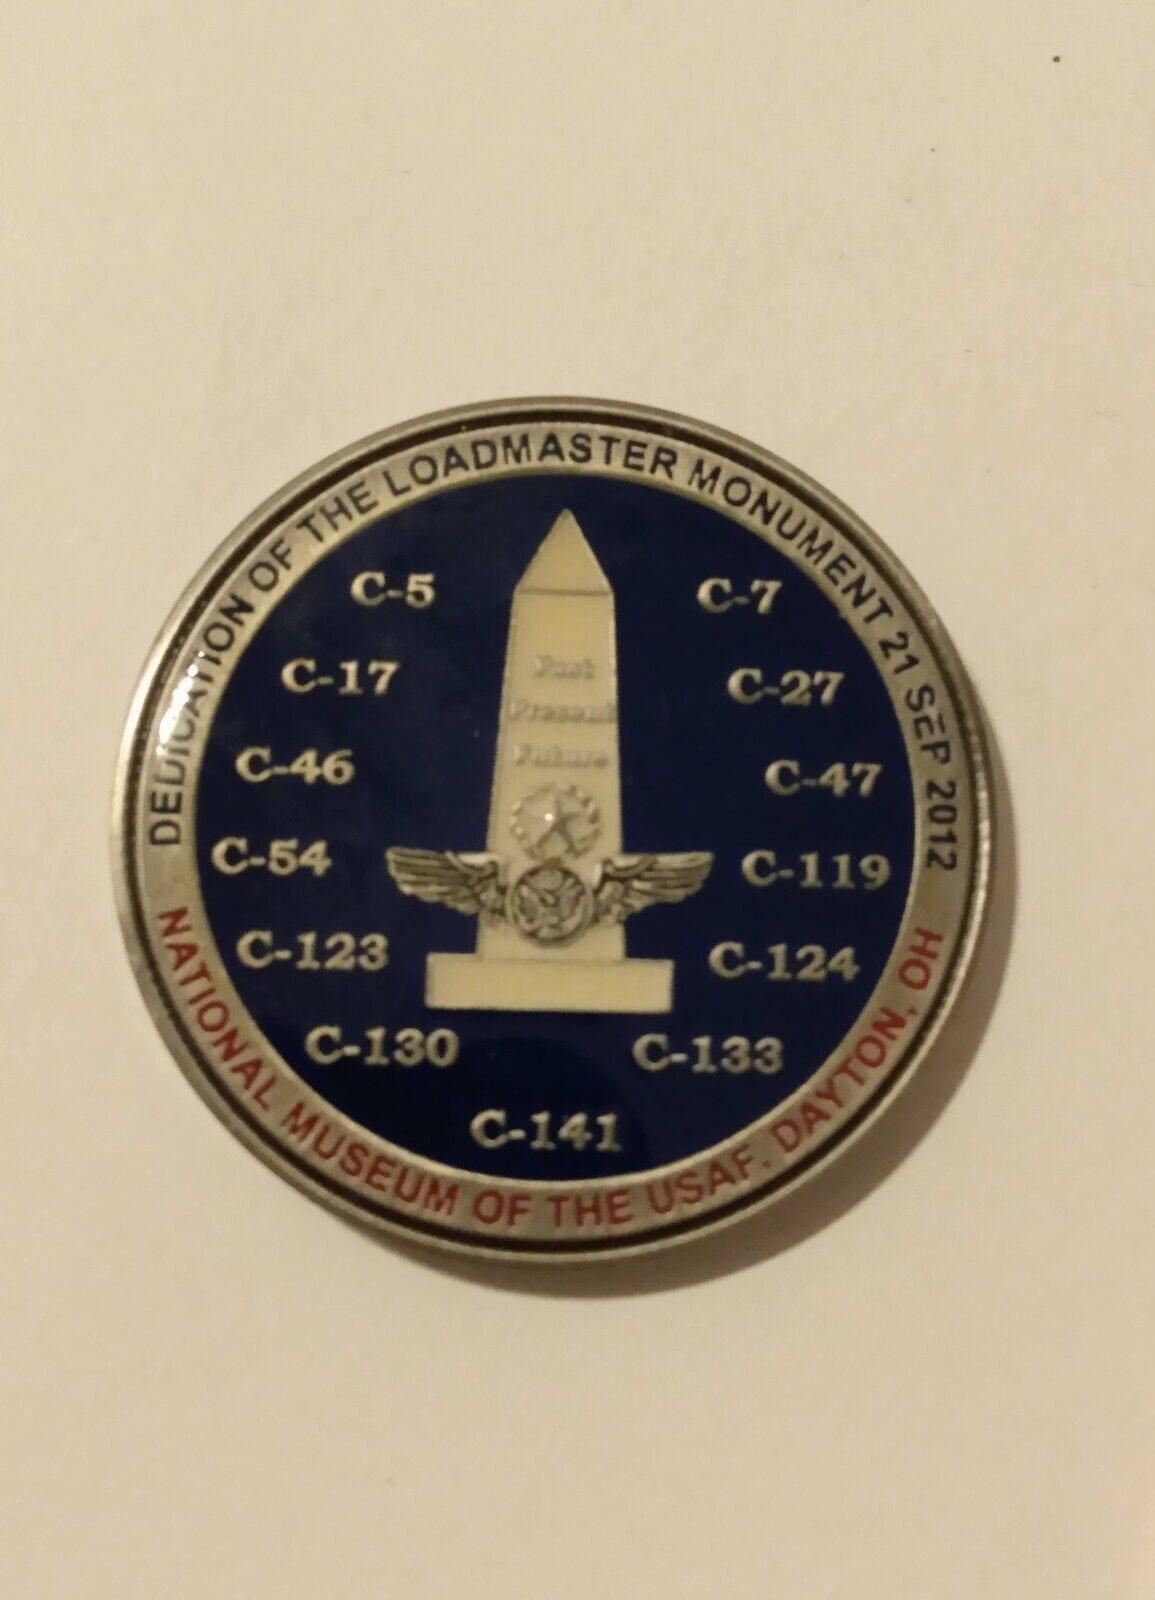 Professional Load Master Assoc Nat\'l Museum of the USAF Ohio 1997 Challenge Coin